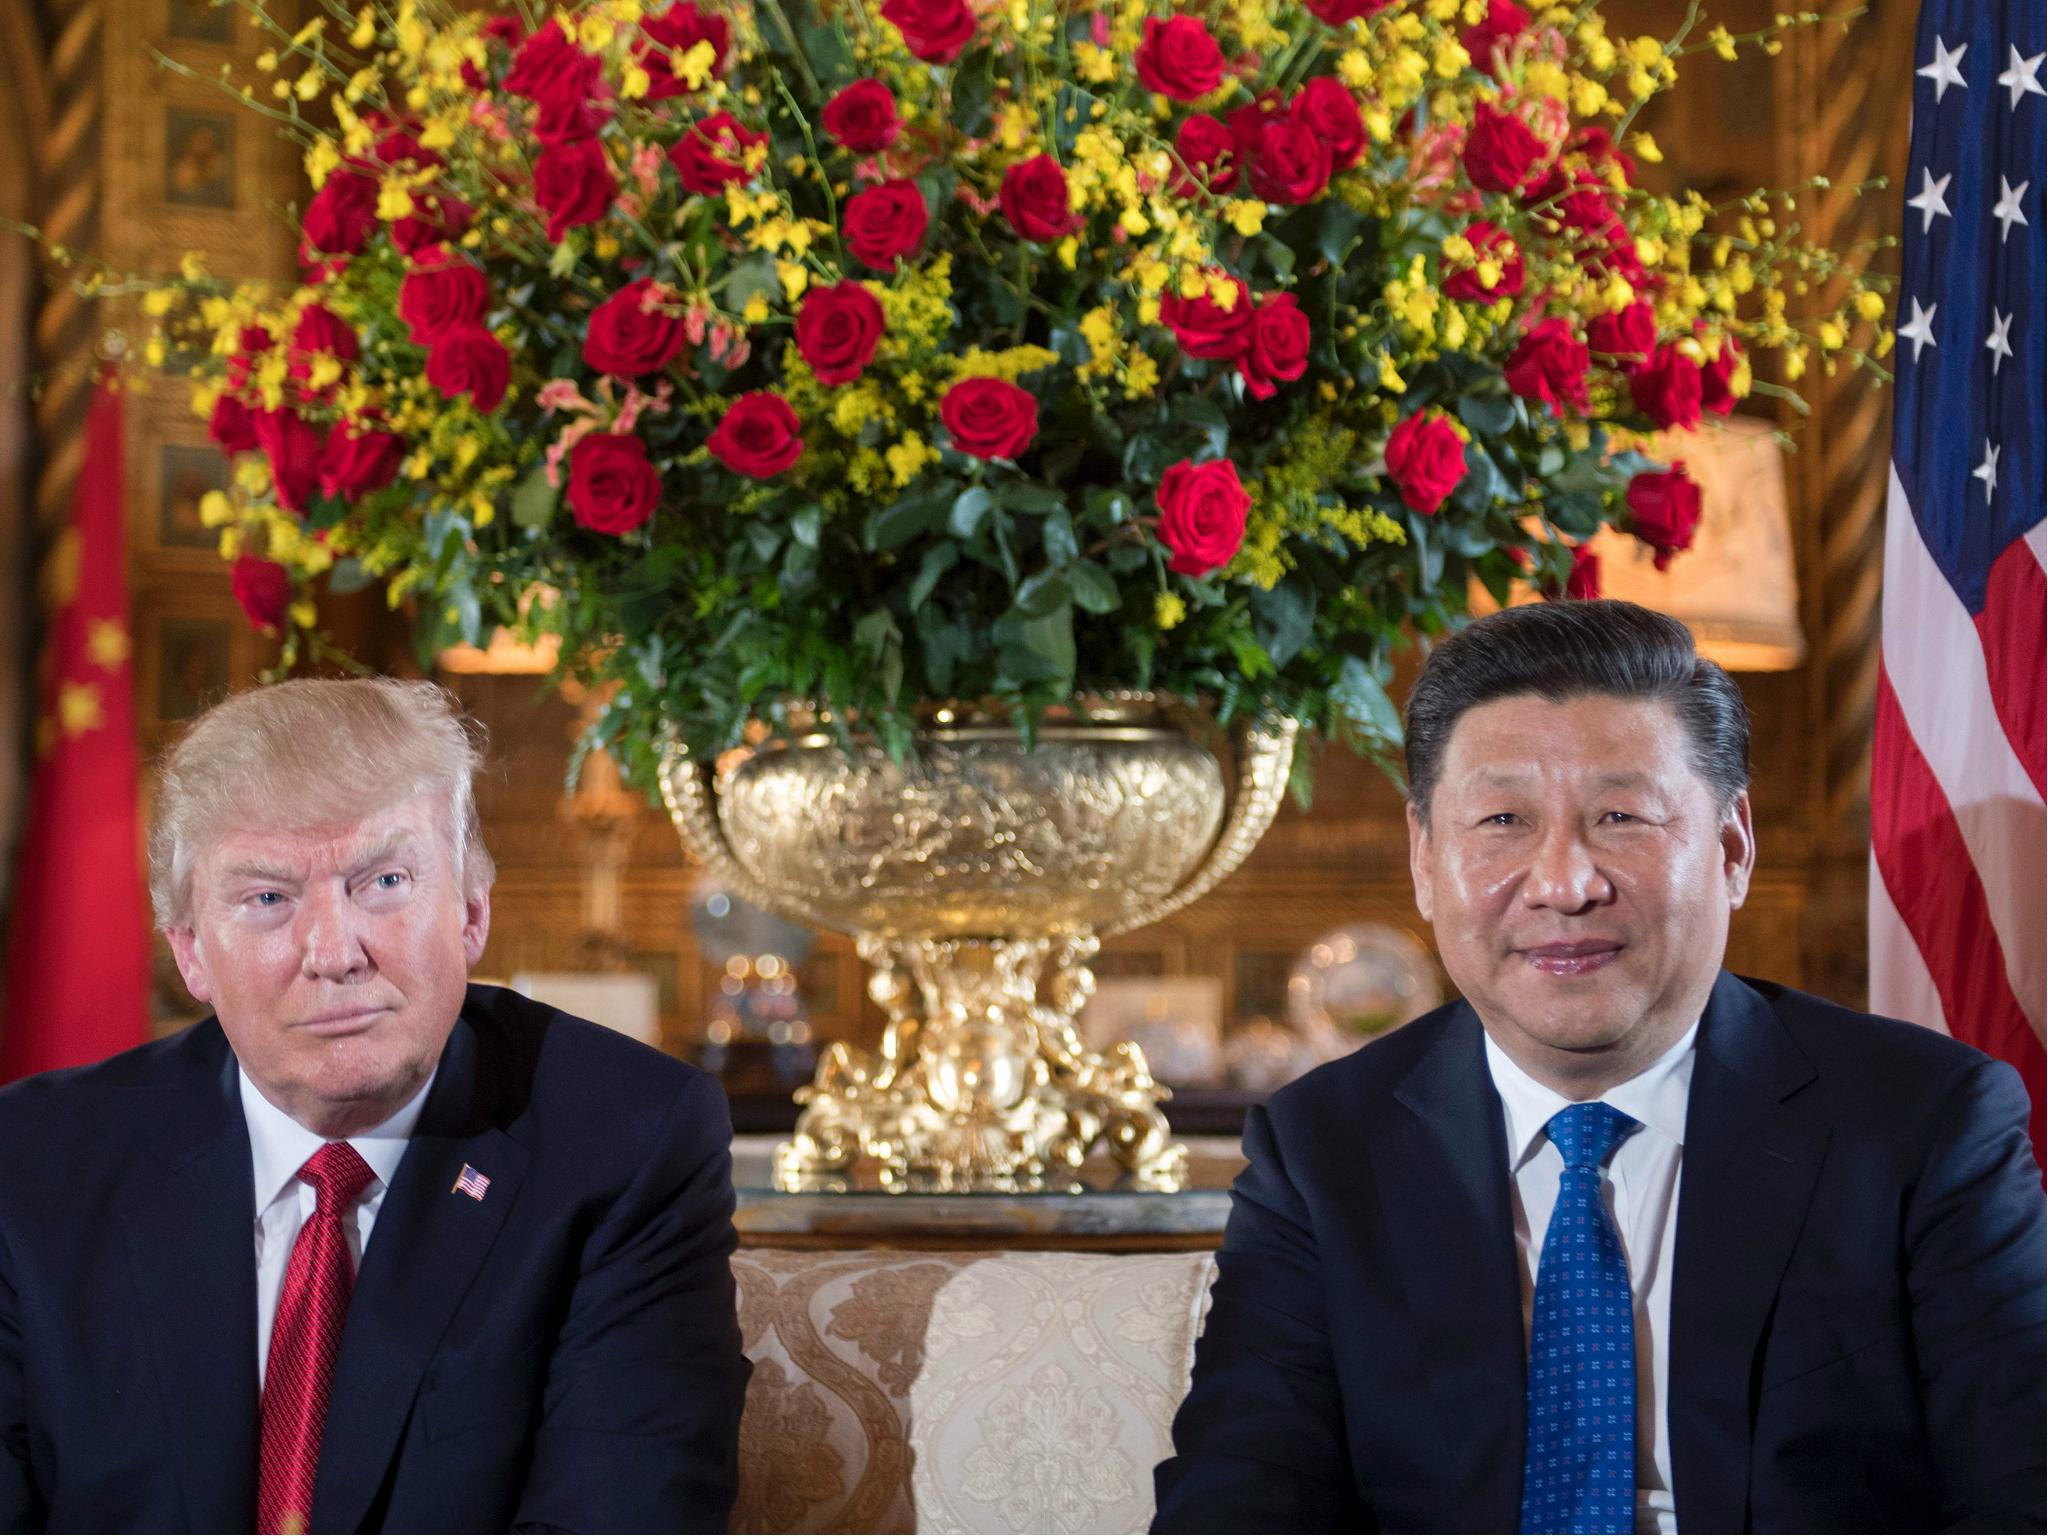 Donald Trump met with Chinese President Xi Jinping during a bilateral meeting in April 2017